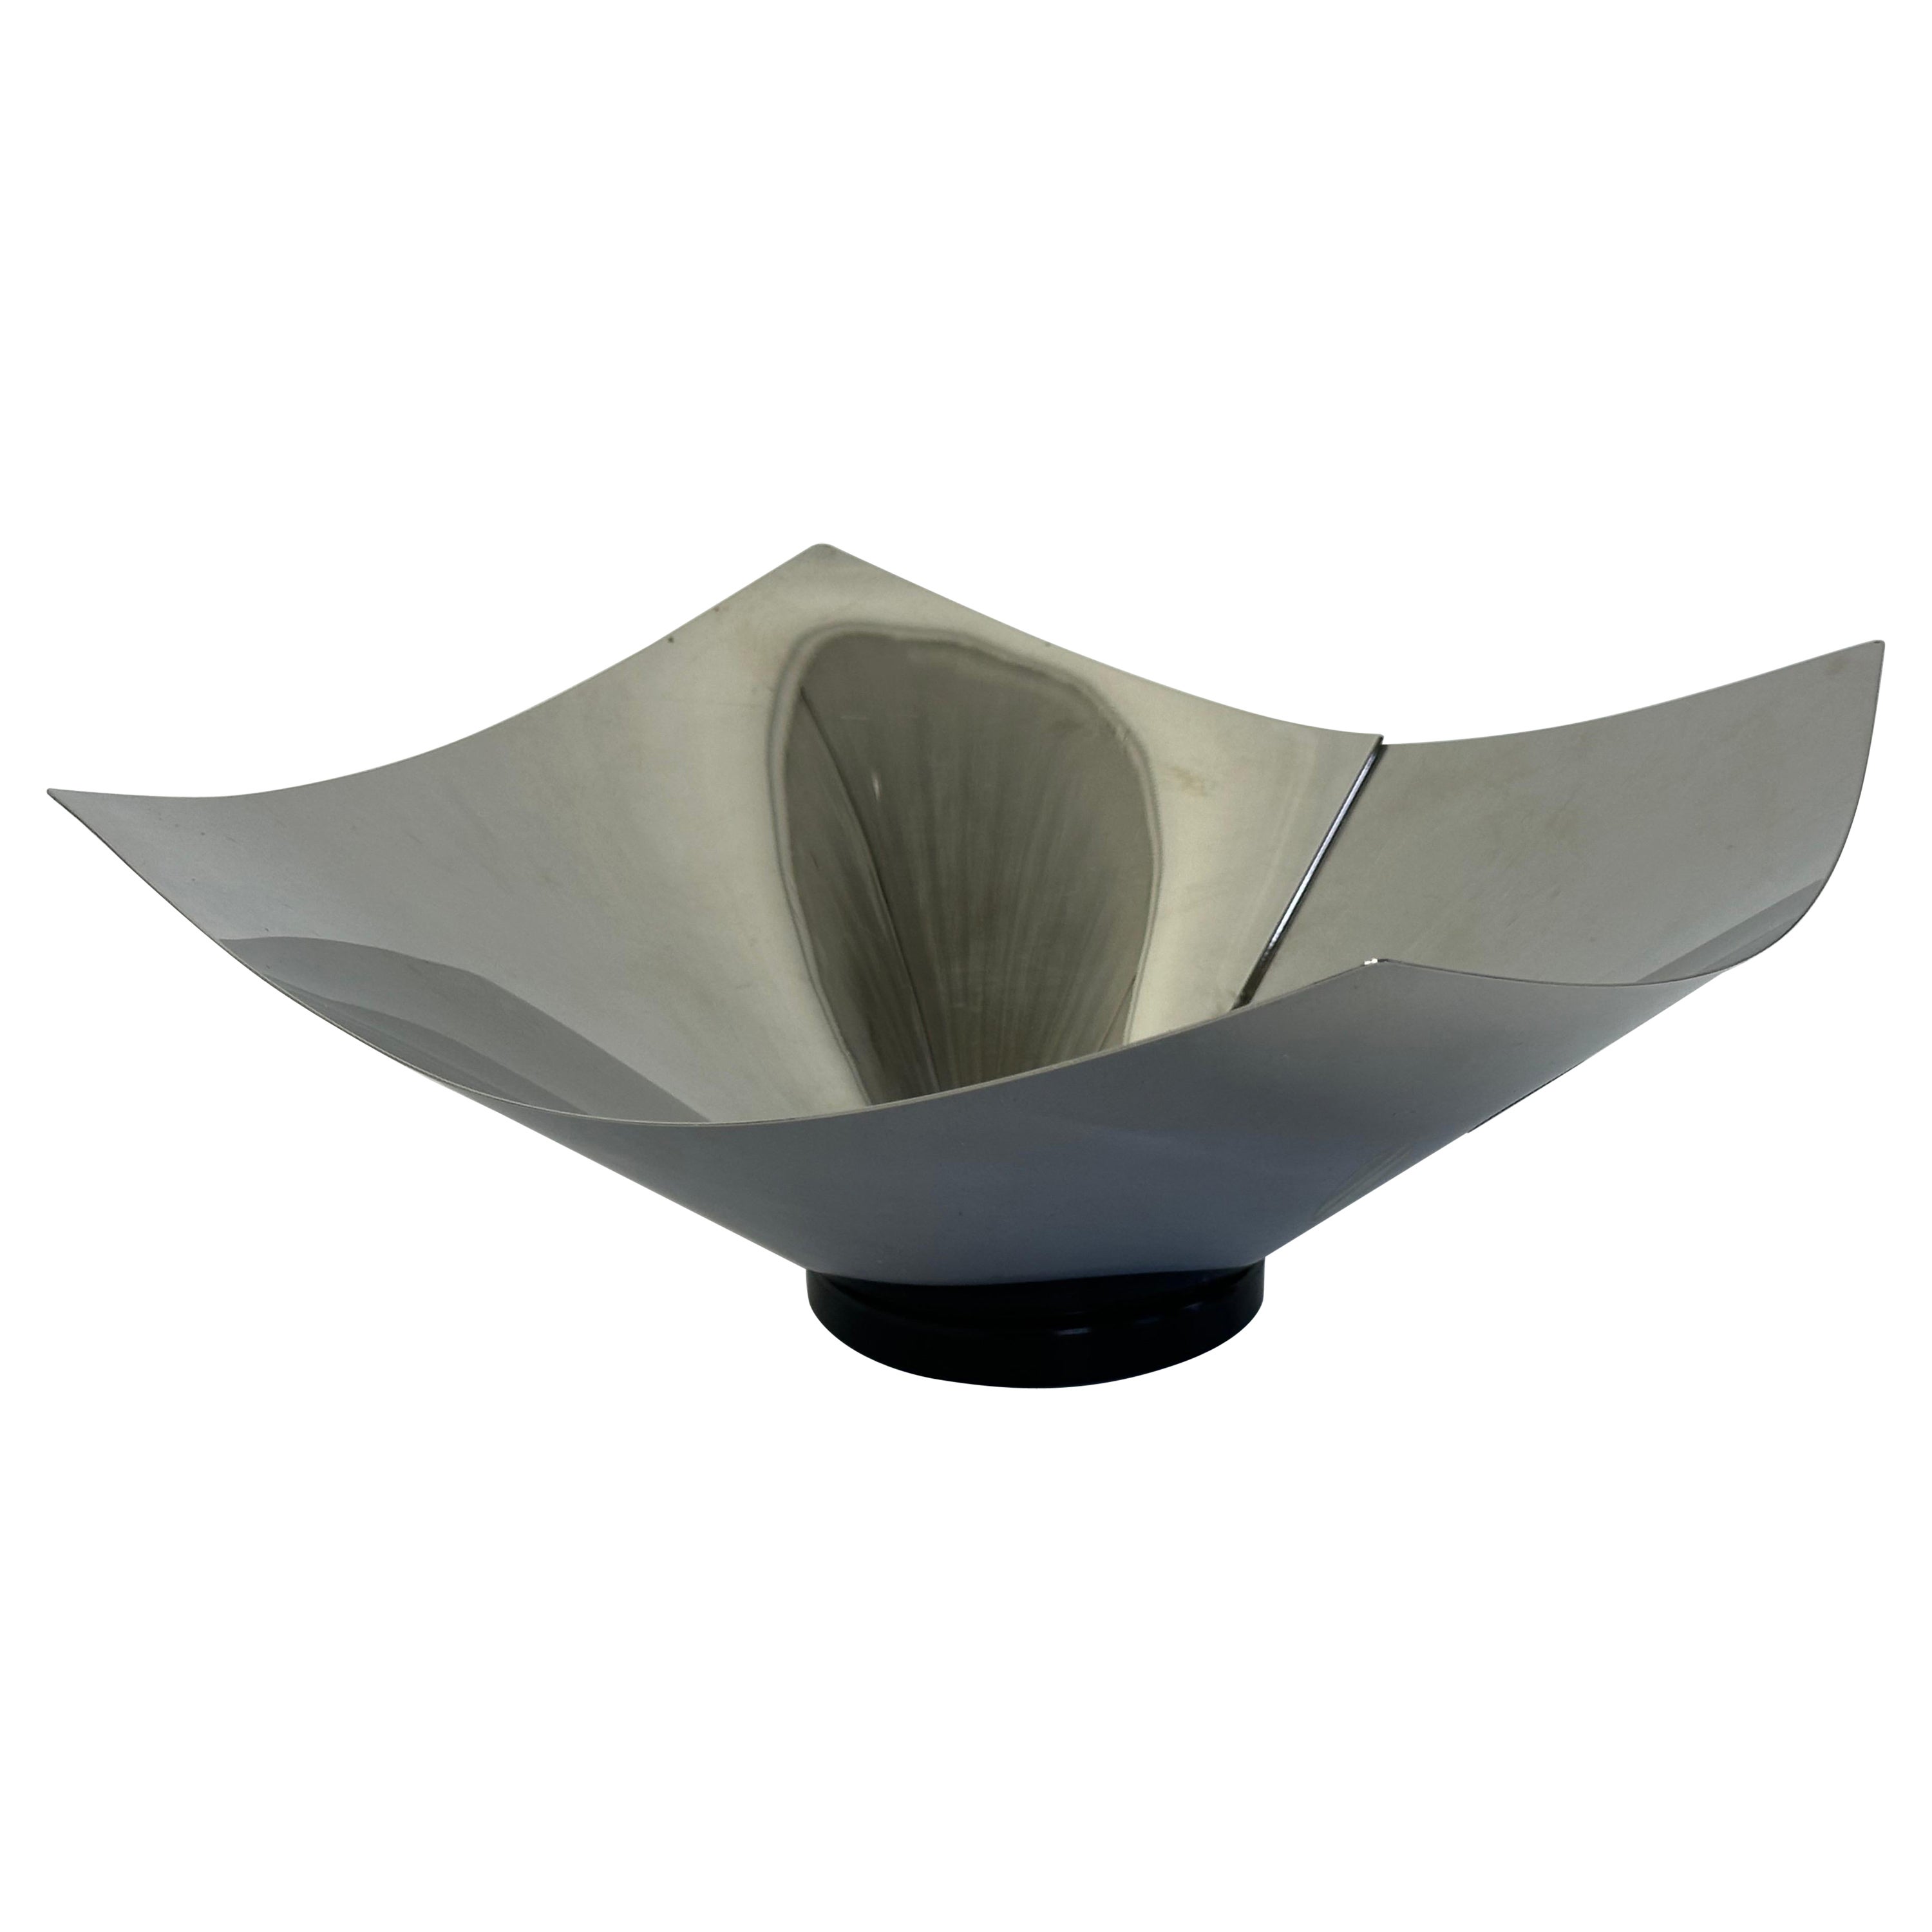 Silvio Coppola Polished Stainless Steel Lobo Fruit Bowl for Alessi, 1990s For Sale